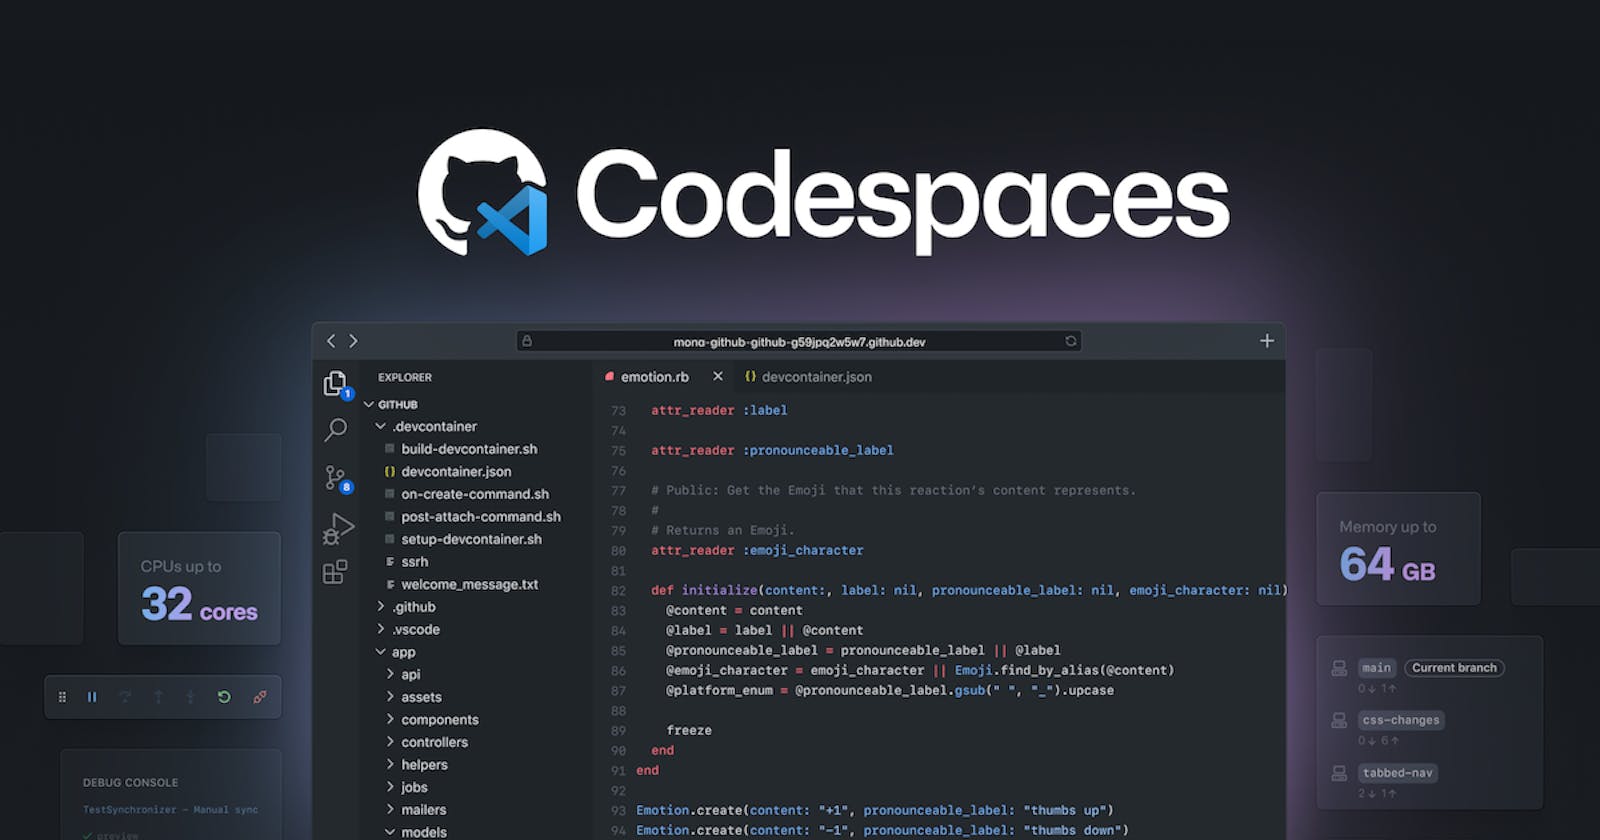 GitHub’s Engineering Team has moved to Codespaces